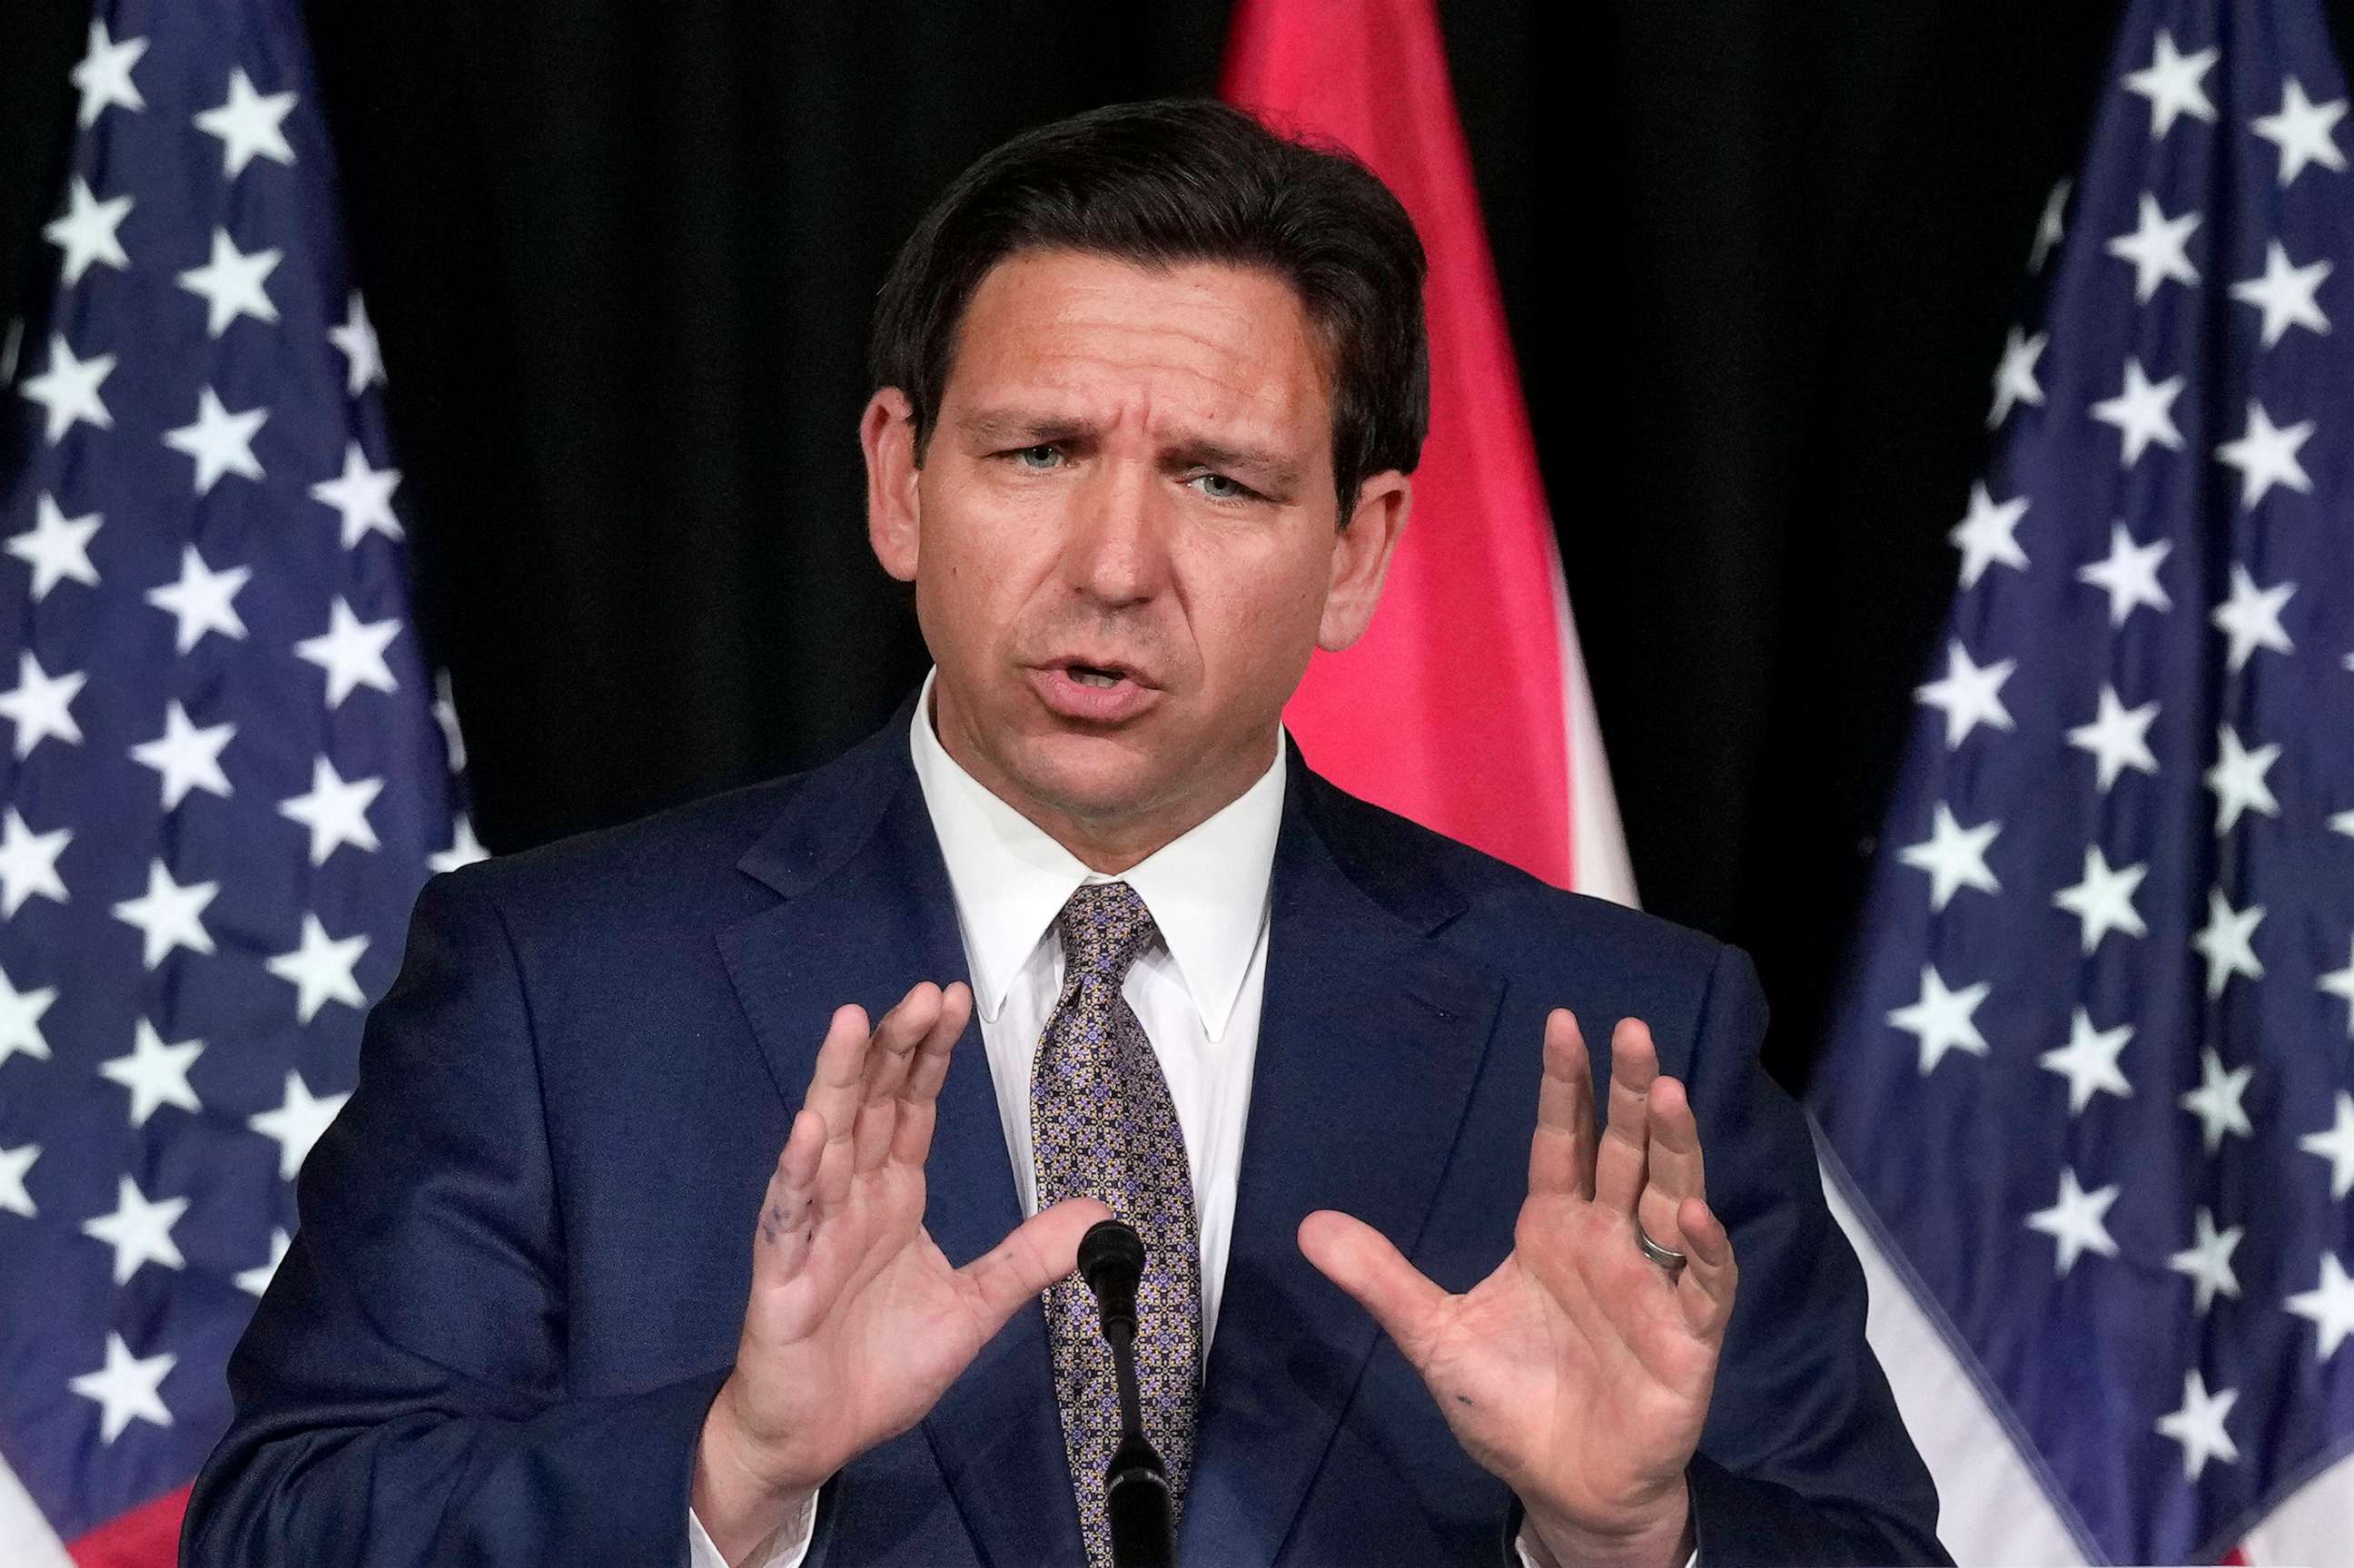 PHOTO: Florida Gov. Ron DeSantis speaks as he announces a proposal for Digital Bill of Rights, Wednesday, Feb. 15, 2023, at Palm Beach Atlantic University in West Palm Beach, Fla.